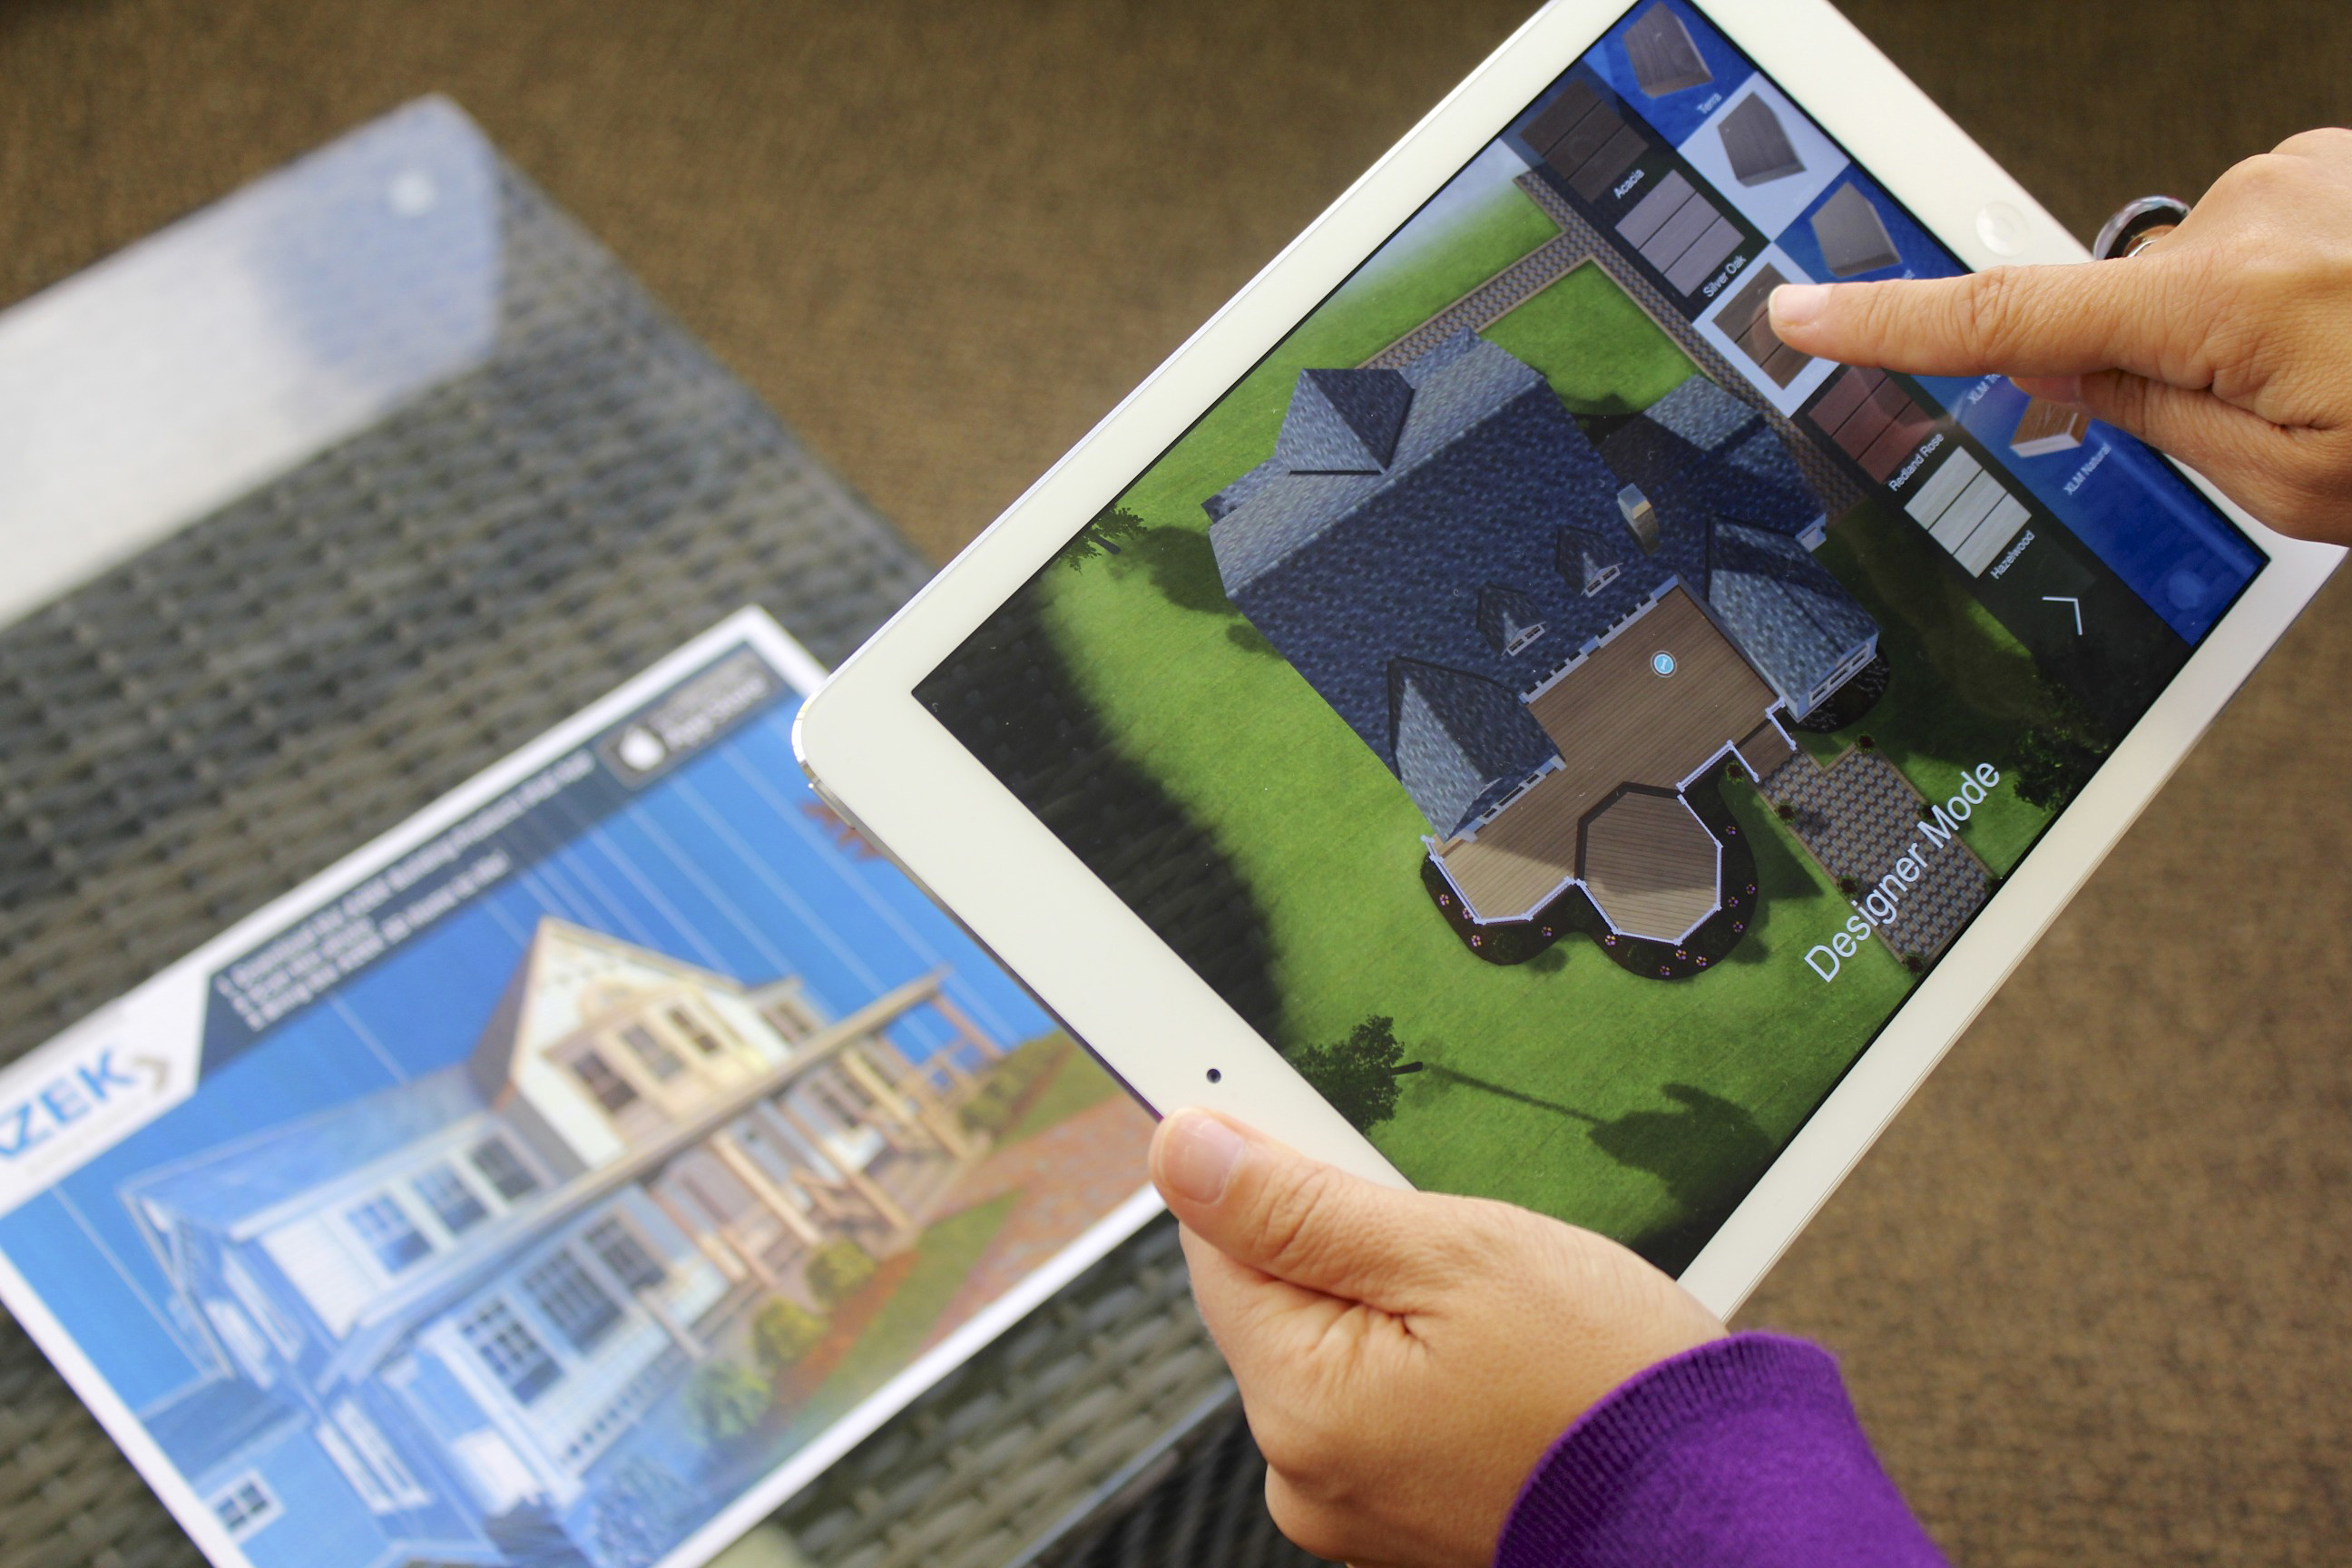 Visualizing a dream deck or patio is now possible with the AZEK iPad App.